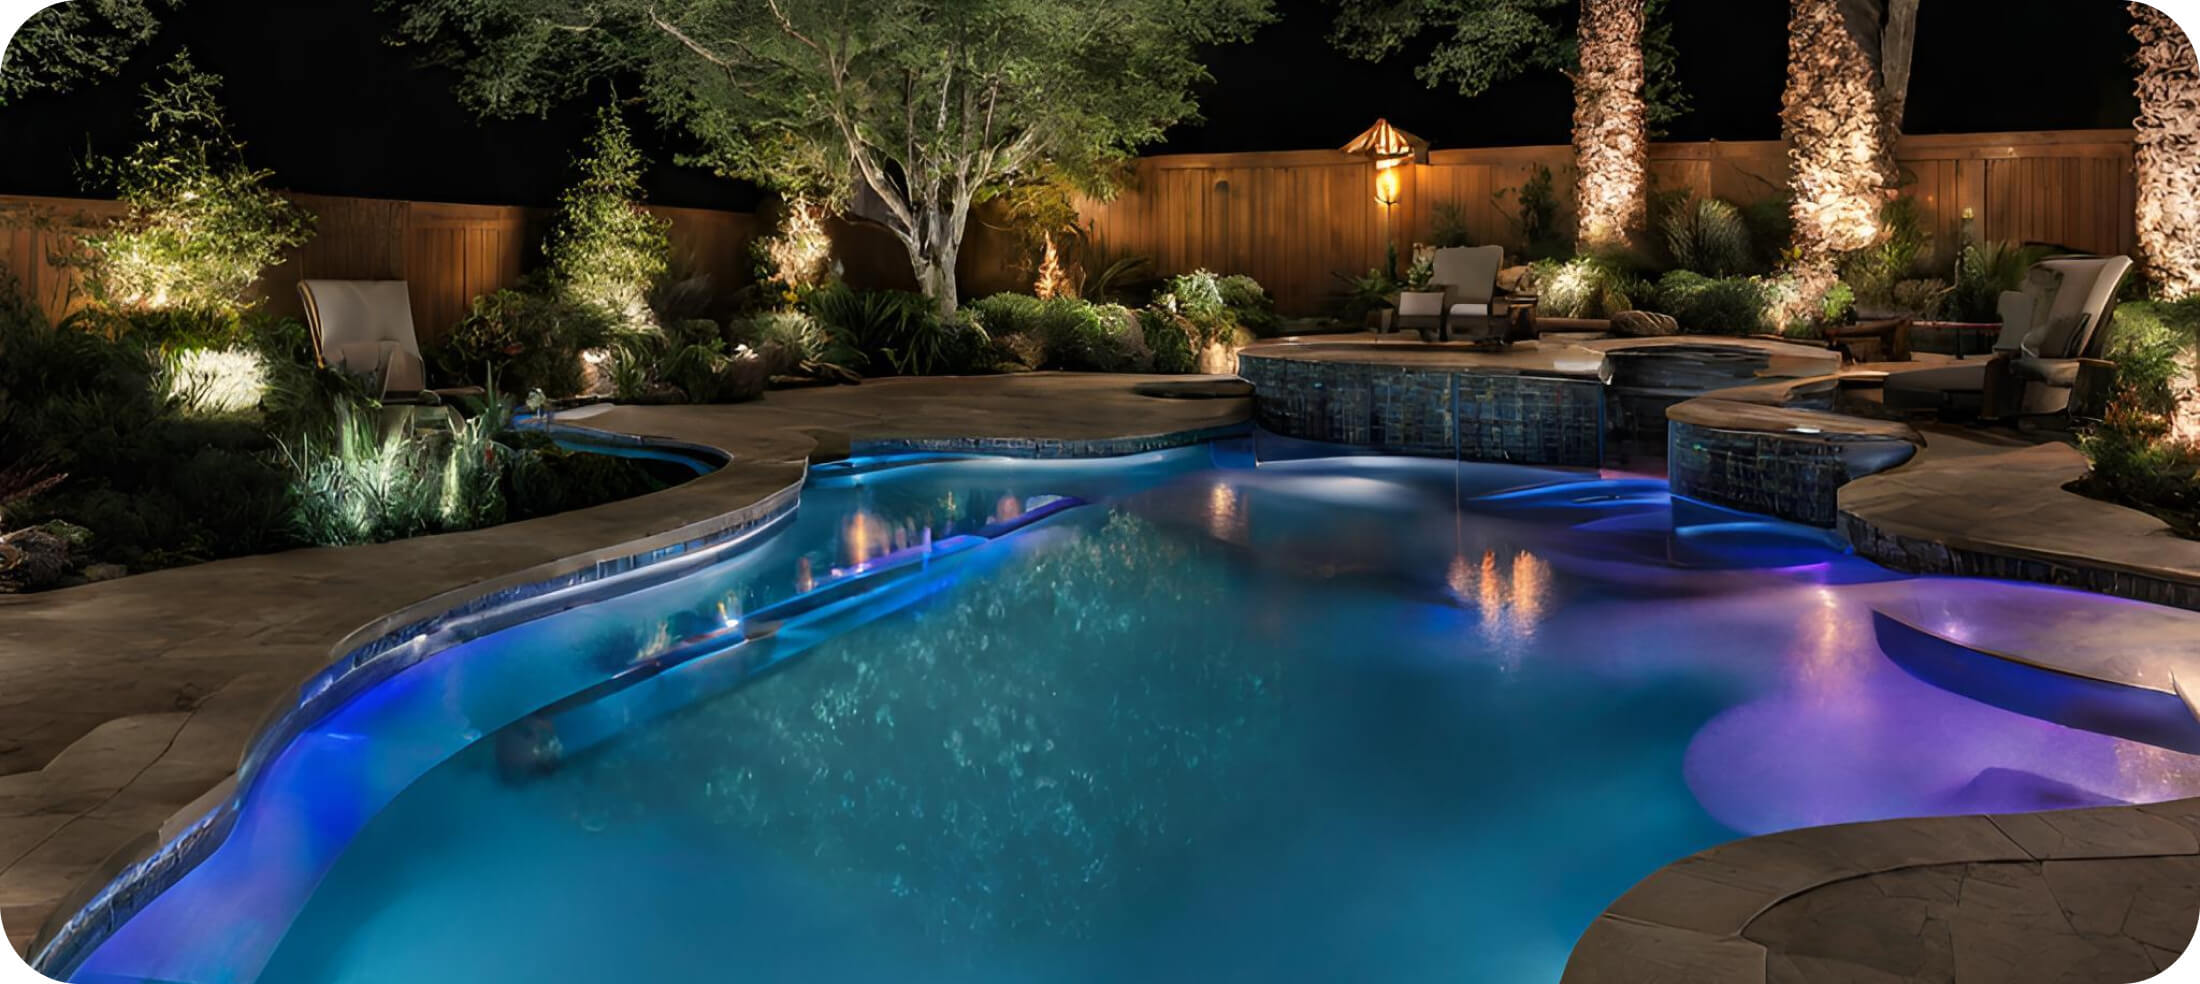 Pool lighting example for residential home